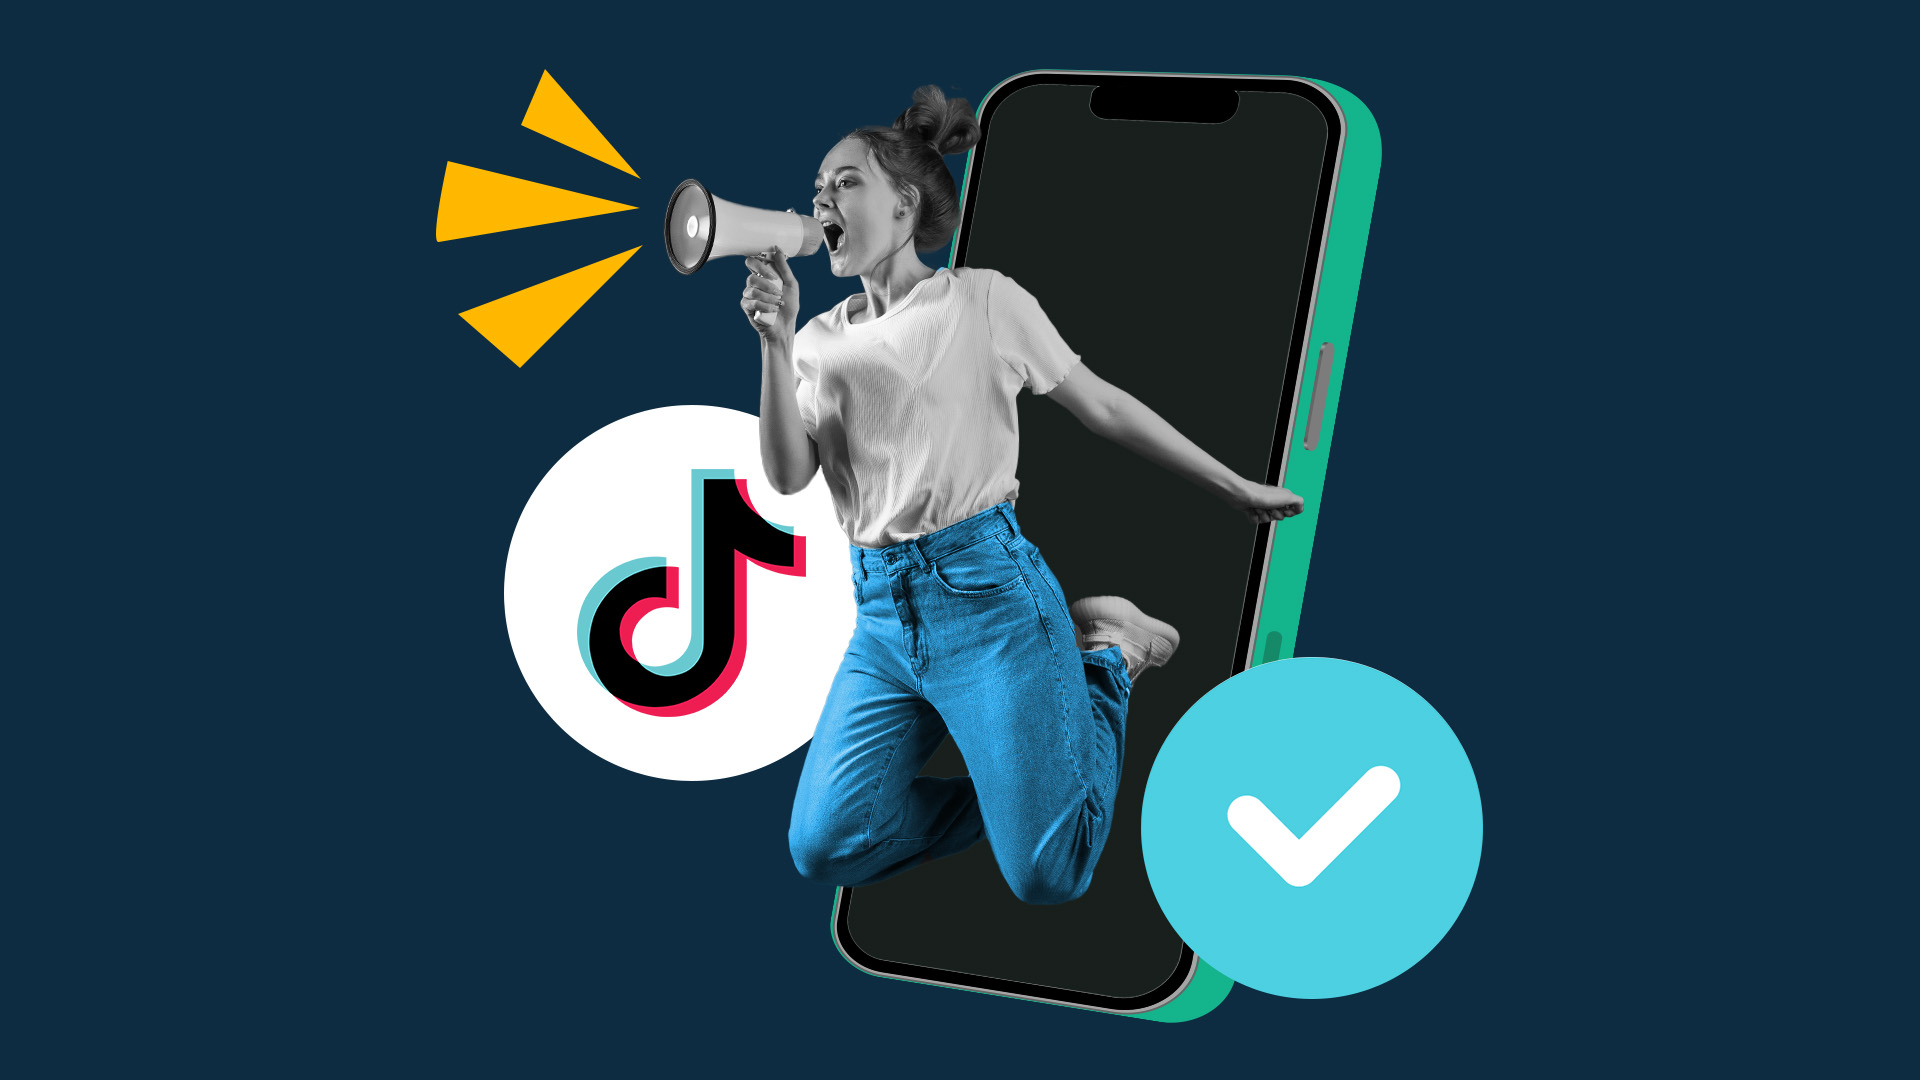 In this image, there is a person jumping out of a phone. On their left is the TikTok logo and on their right is the verification checkmark. This image represents getting verified on TikTok.